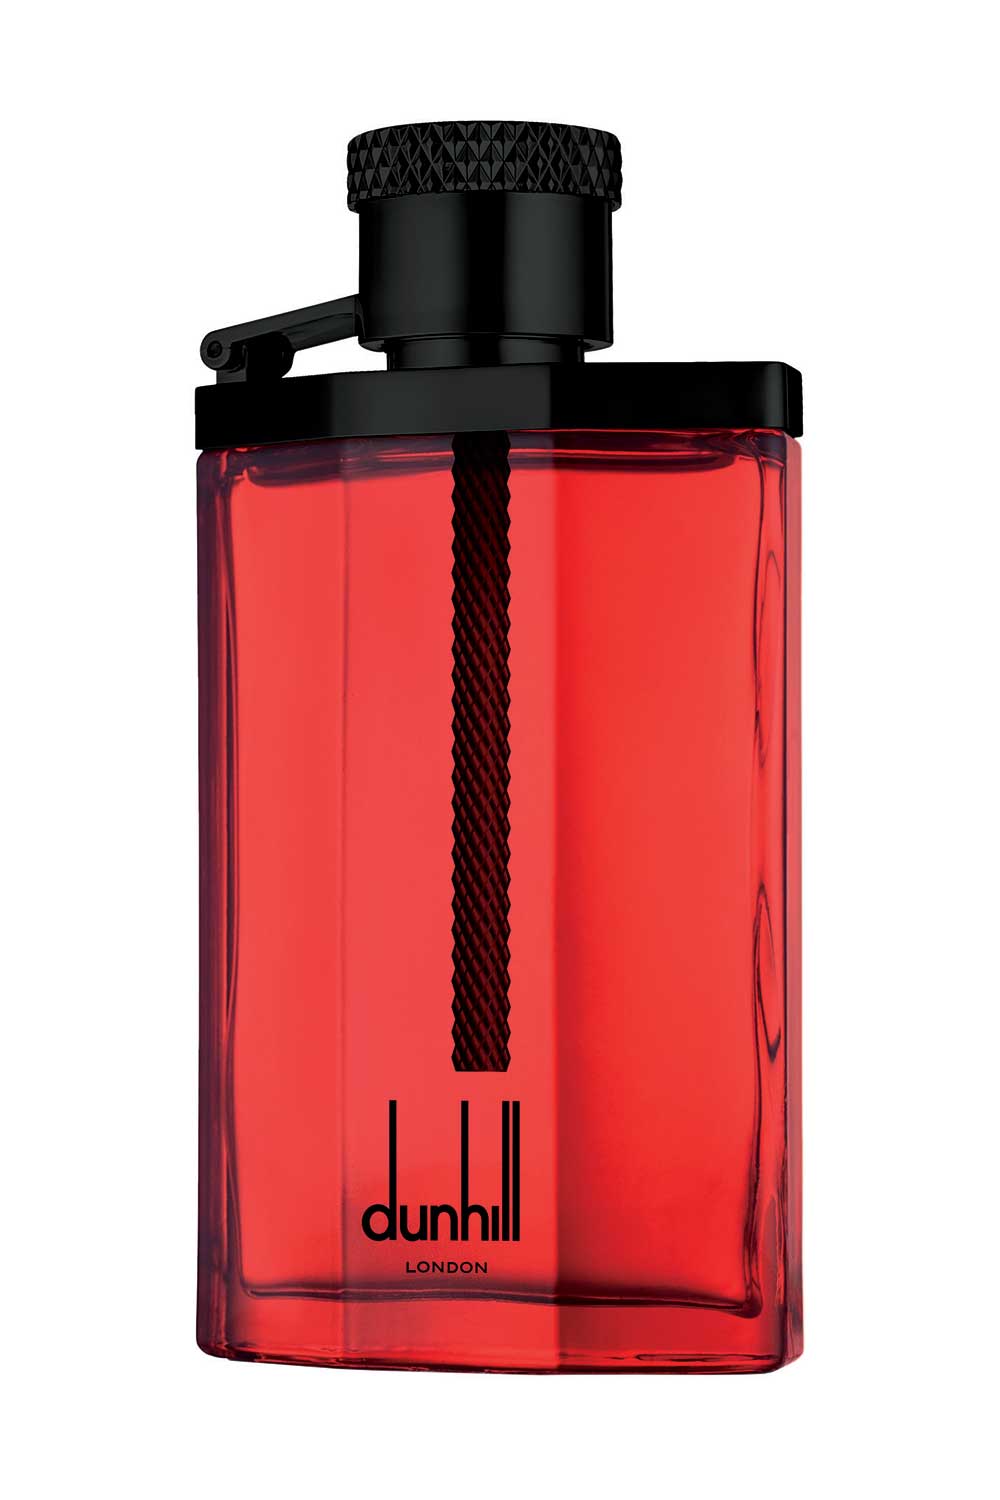 dunhill perfume for mens